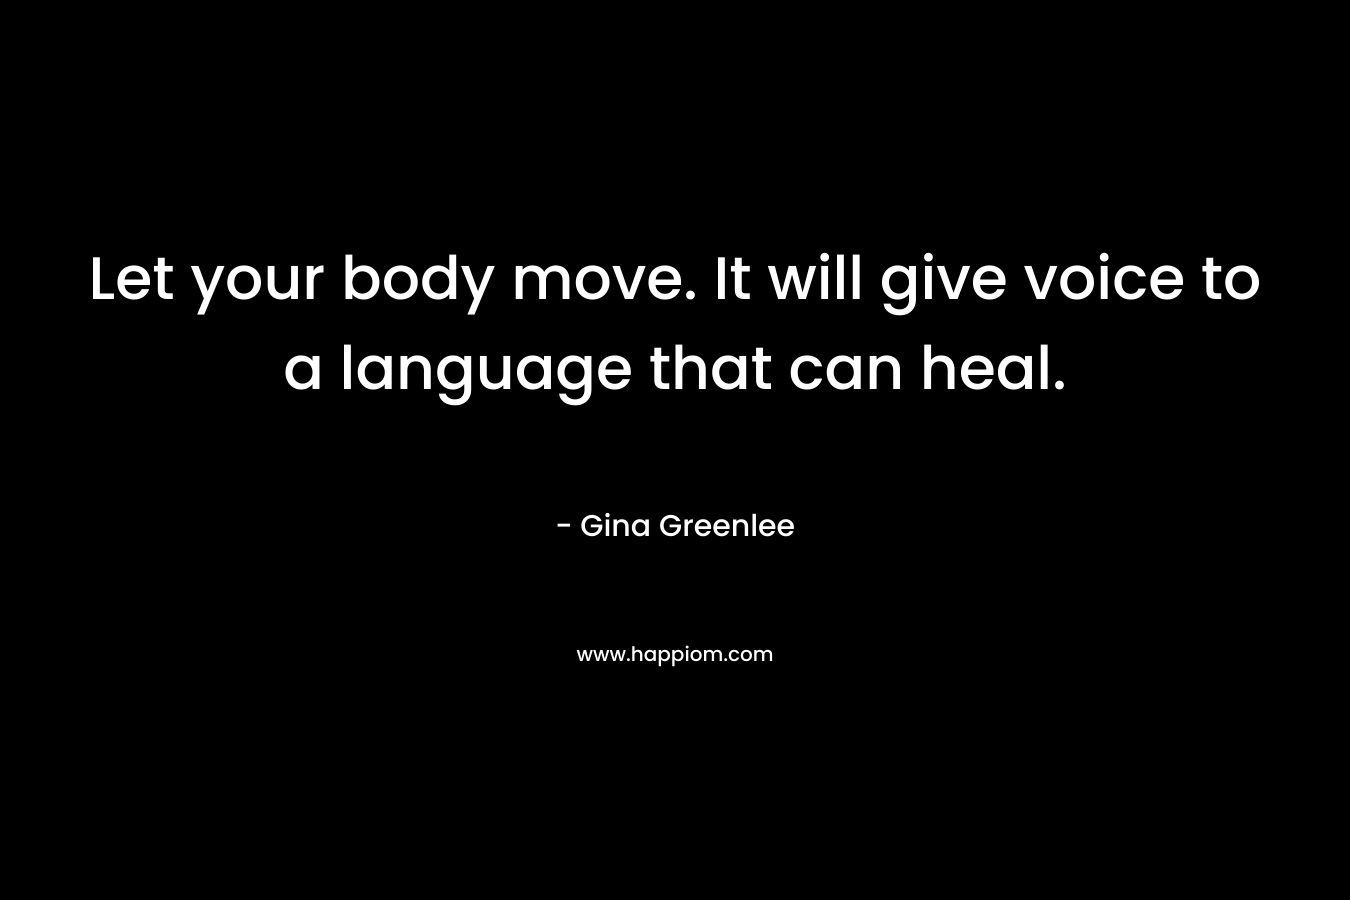 Let your body move. It will give voice to a language that can heal.